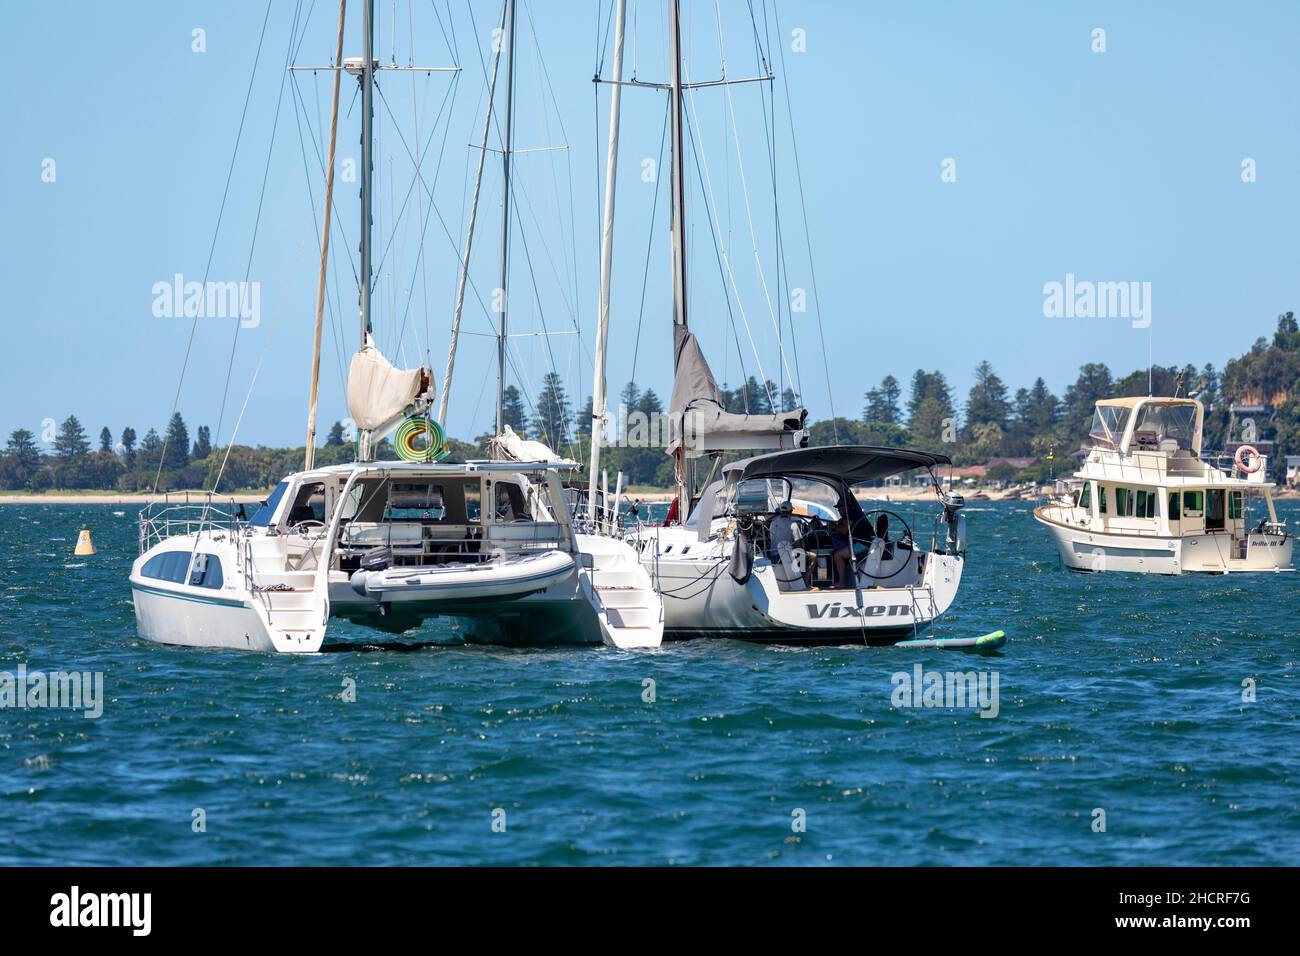 Pittwater Sydney, barche ormeggiate a Pittwater omg a Summers Day, Sydney, Australia Foto Stock